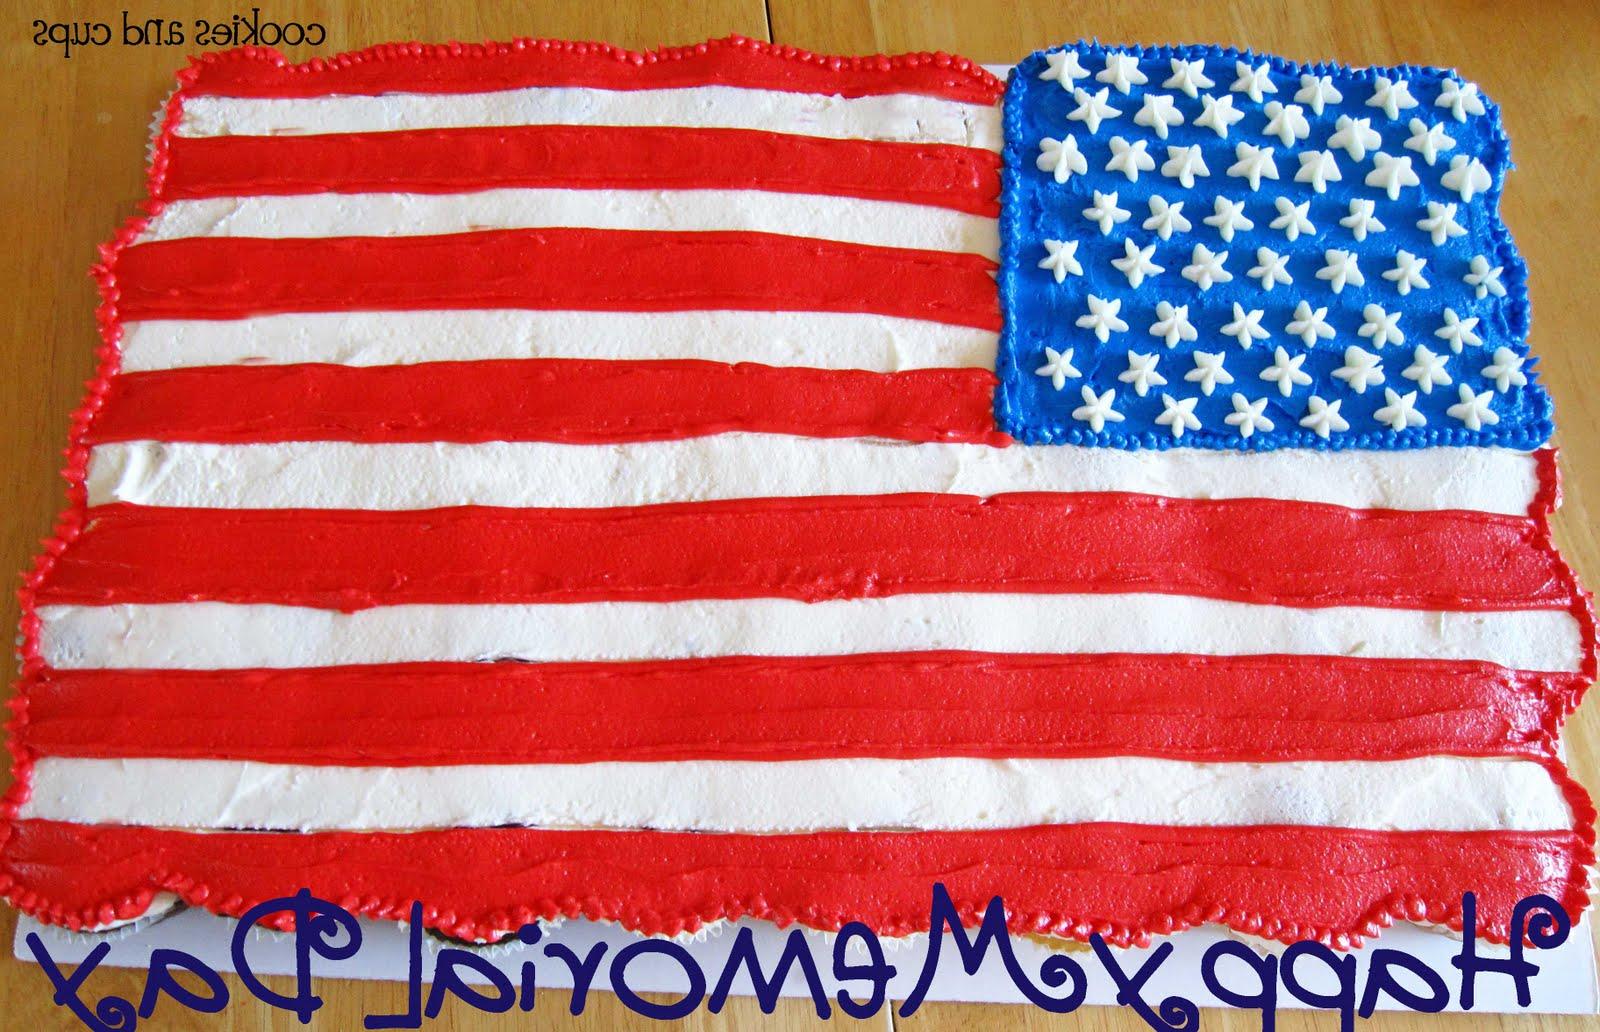 The Cupcake Flag is made from